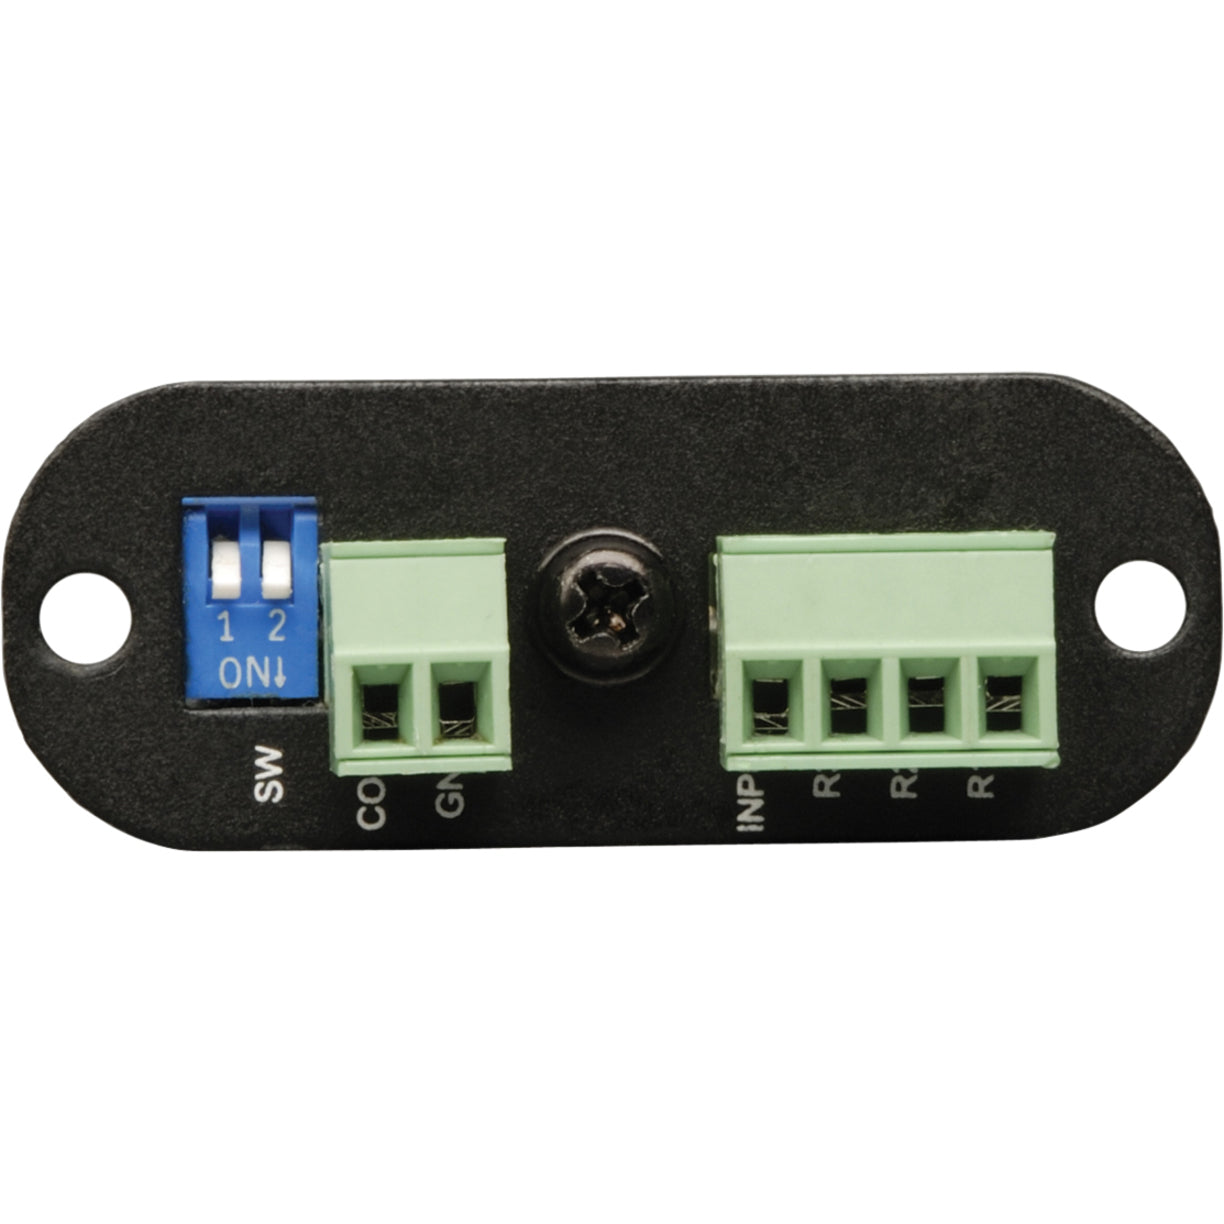 Tripp Lite RELAYIOMINI UPS Power Management Module, USB and Serial Interfaces, 2 Year Warranty